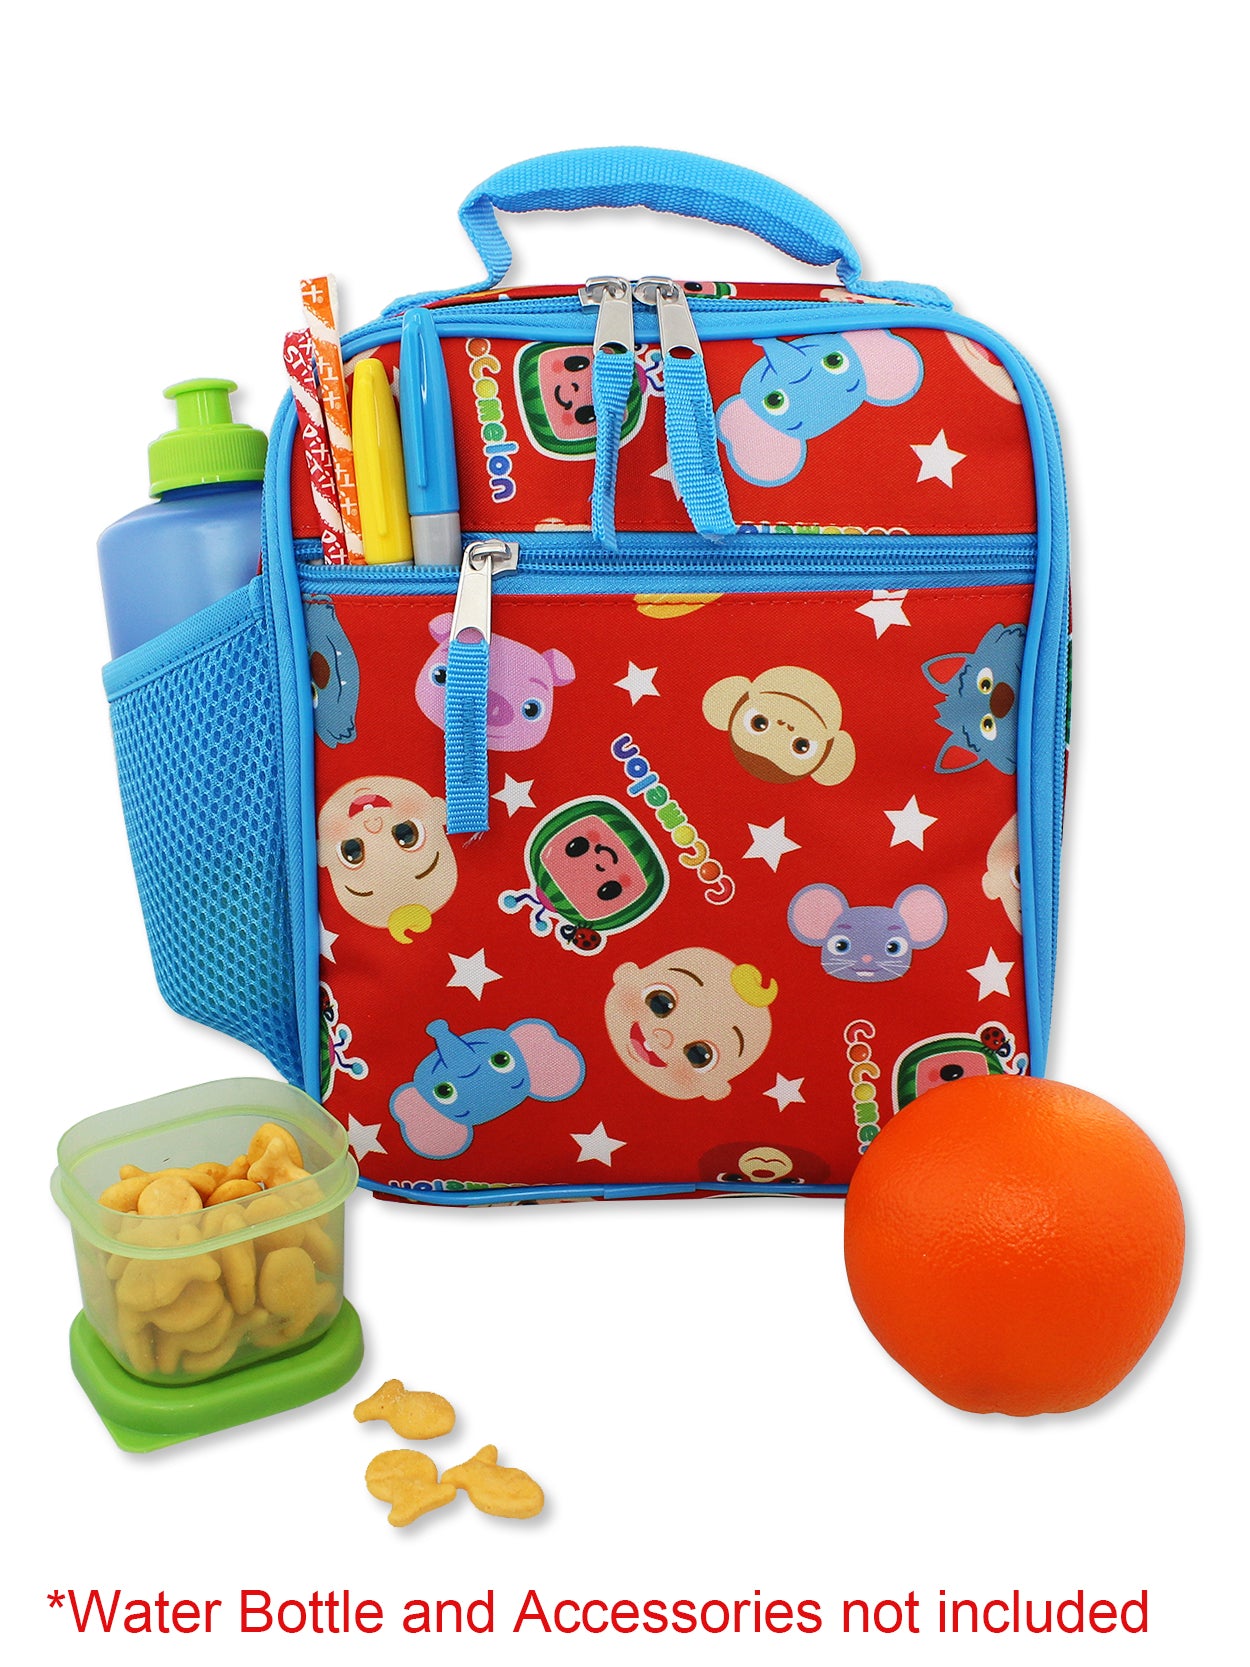 Cocomelon Lunch Box 15 piece Playset, New